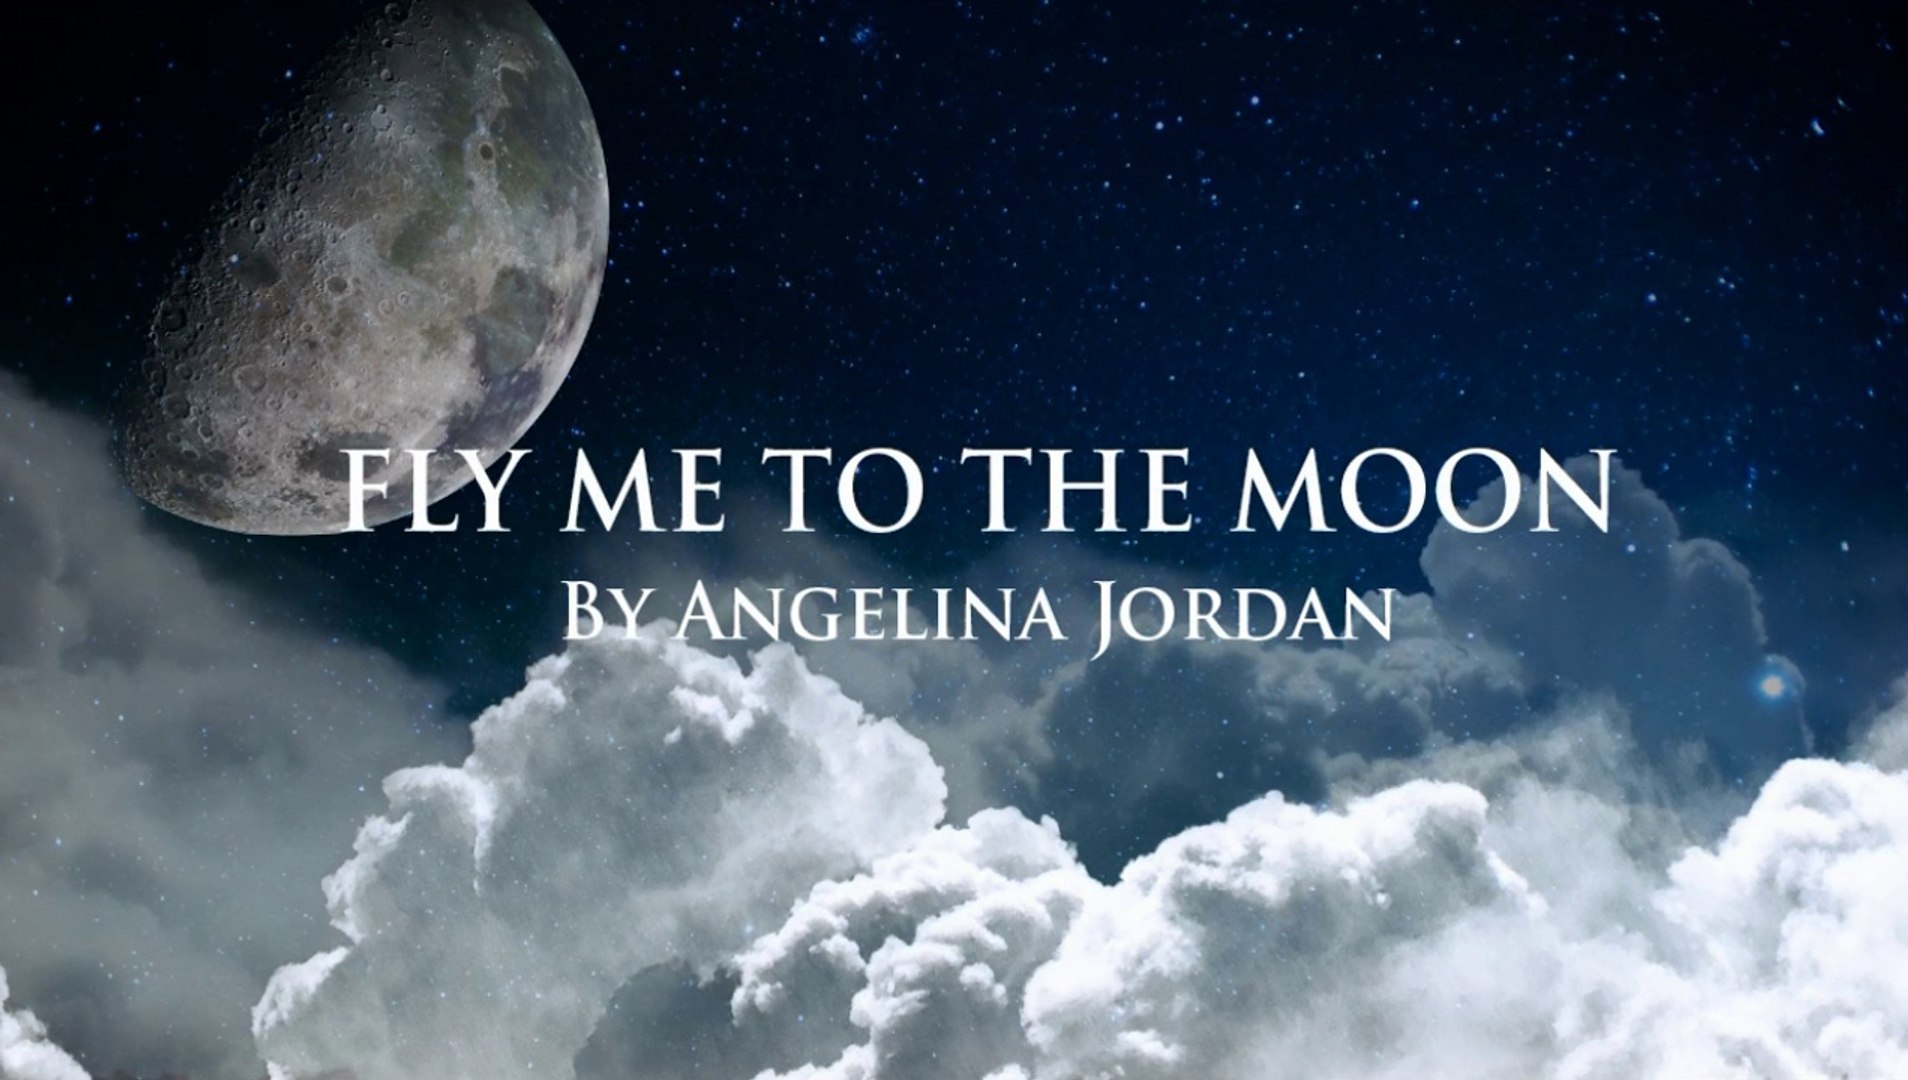 Fem Uenighed tyfon Fly me to the moon by Angelina Jordan - 動画 Dailymotion